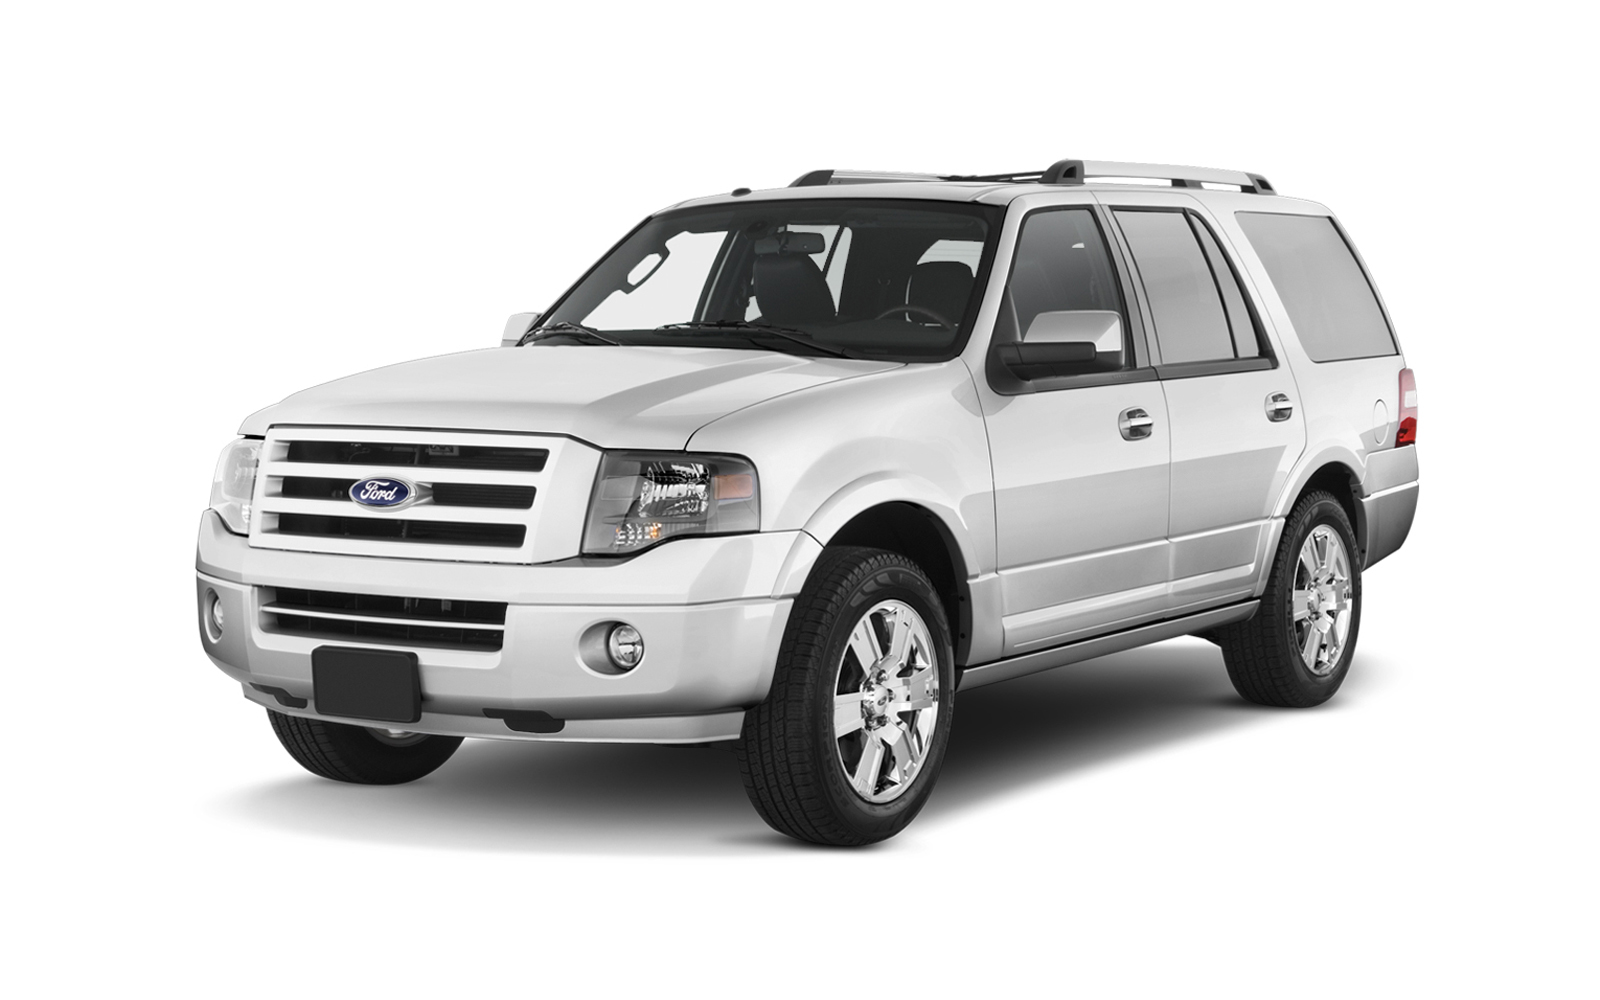 Wallpaper Ford Expedition Suv Car